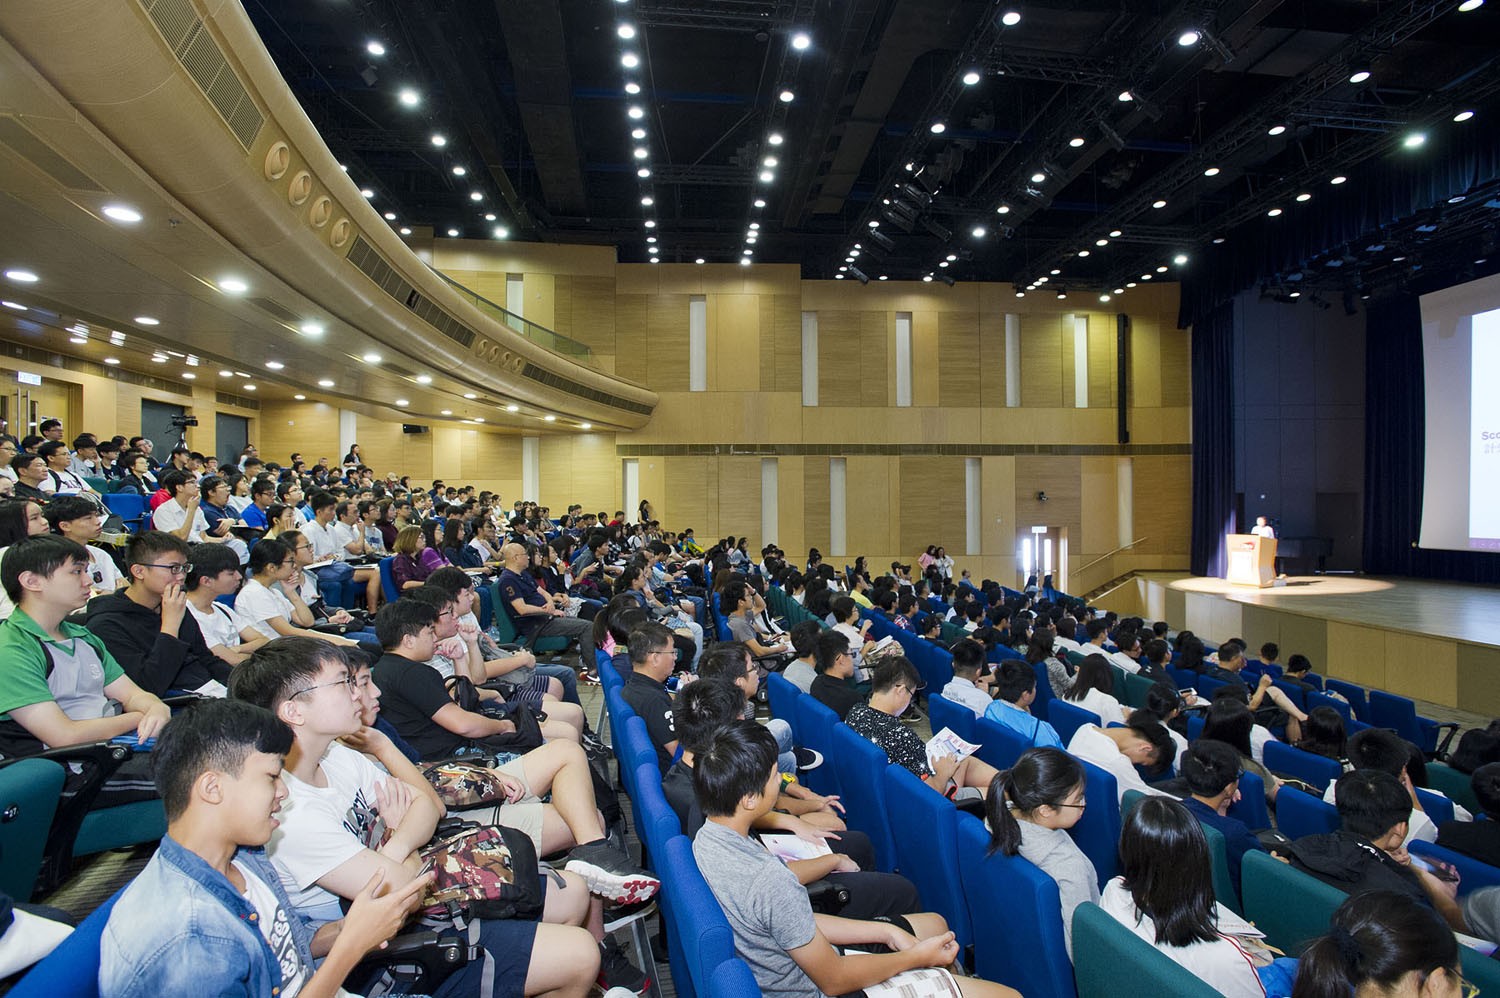 Students and their parents find out more about the latest academic offerings at CityU during Information Day.